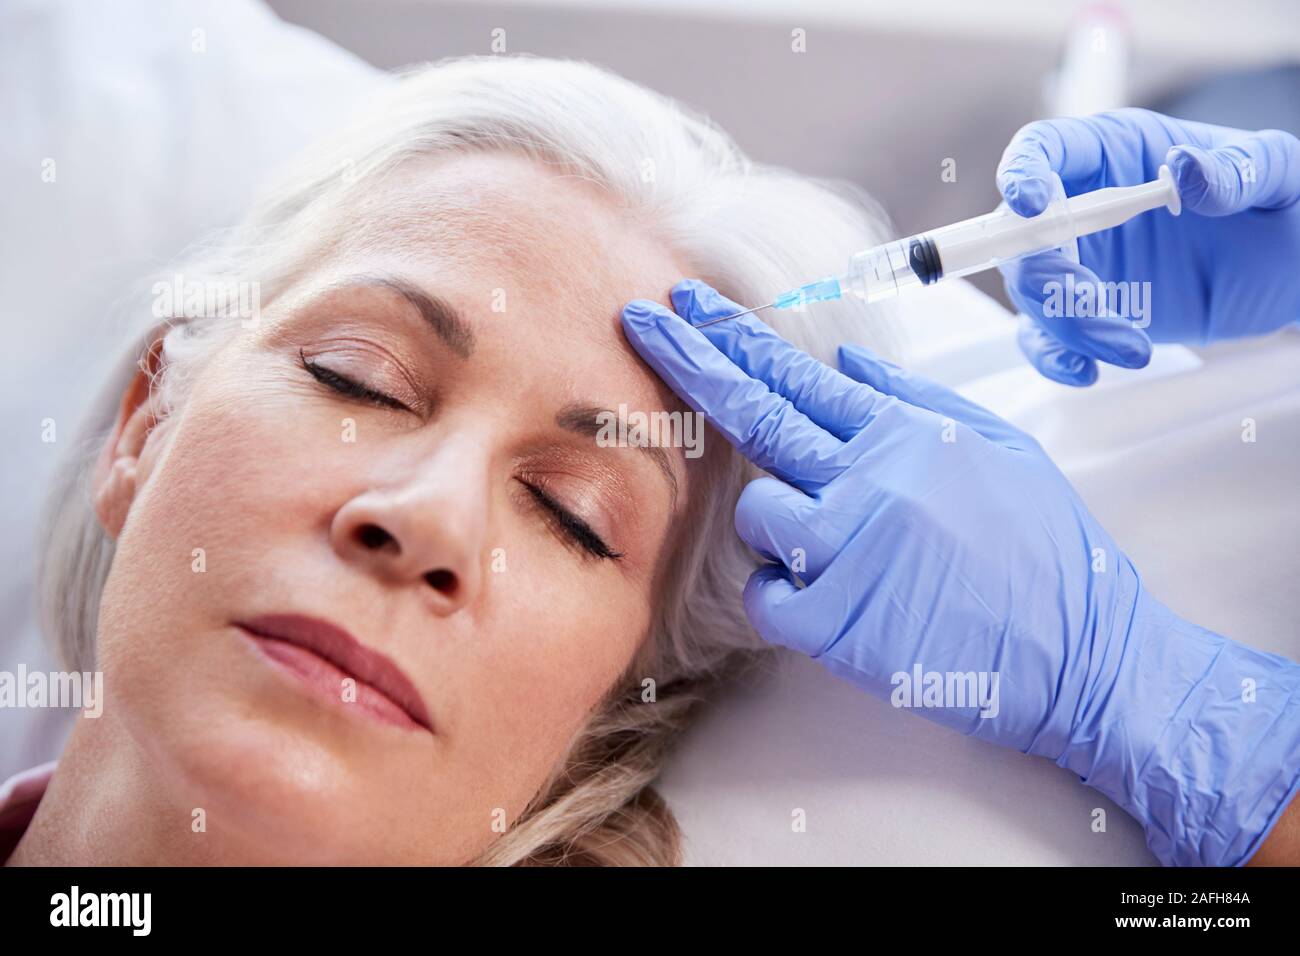 Beautician Giving Mature Female Patient Botox Injection In Forehead Stock Photo